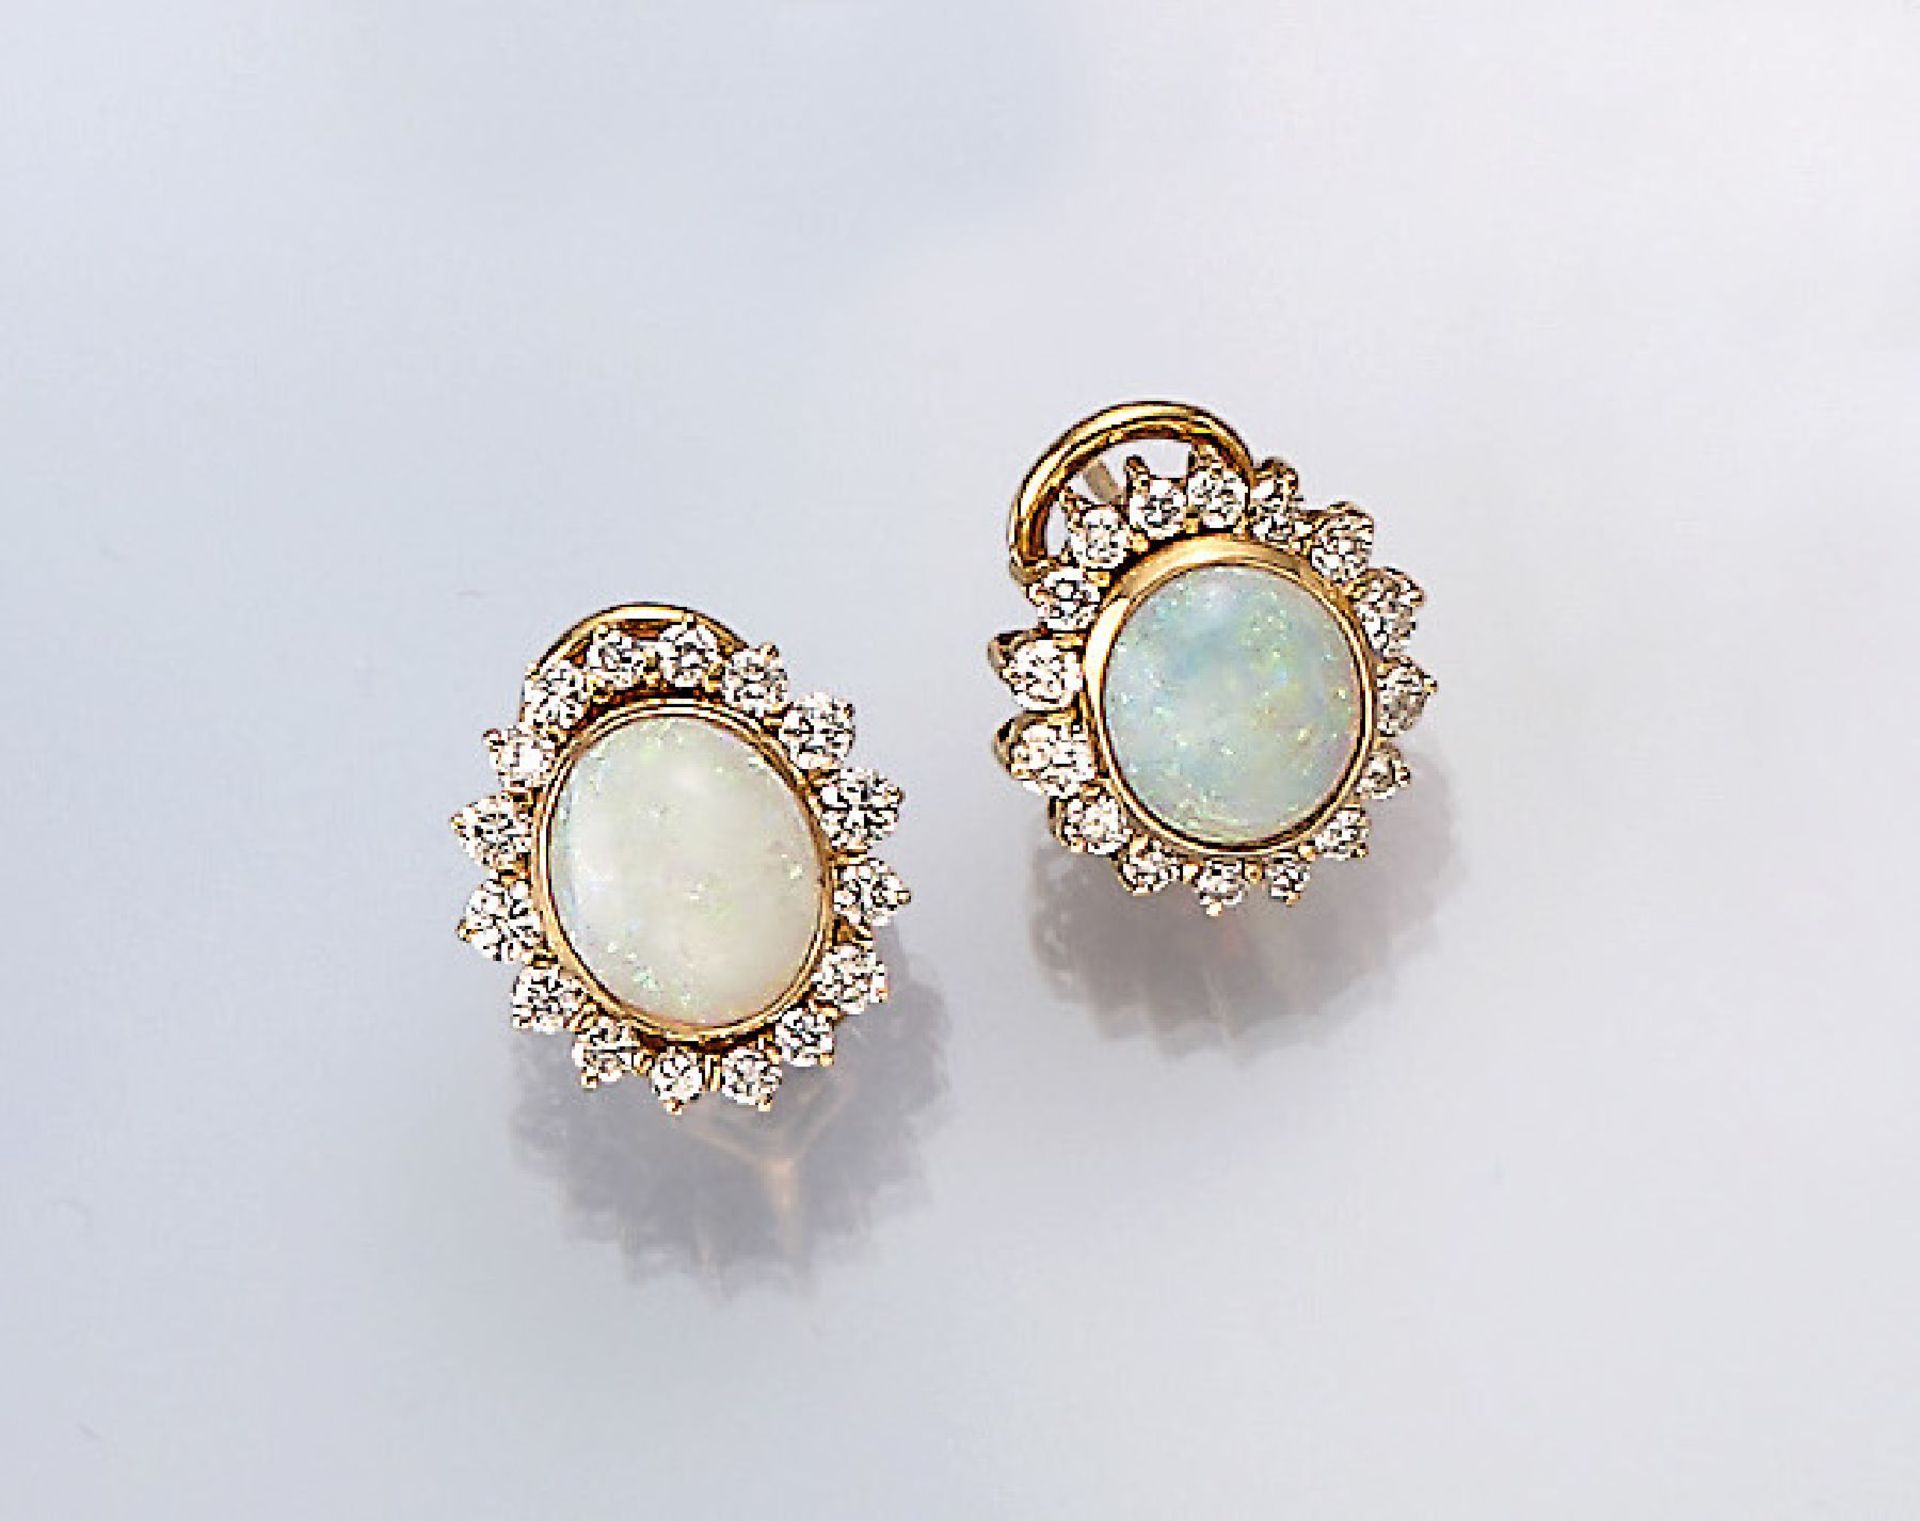 Pair of 18 kt gold earrings with opals and brilliants , YG 750/000, each with oval opalcabochon